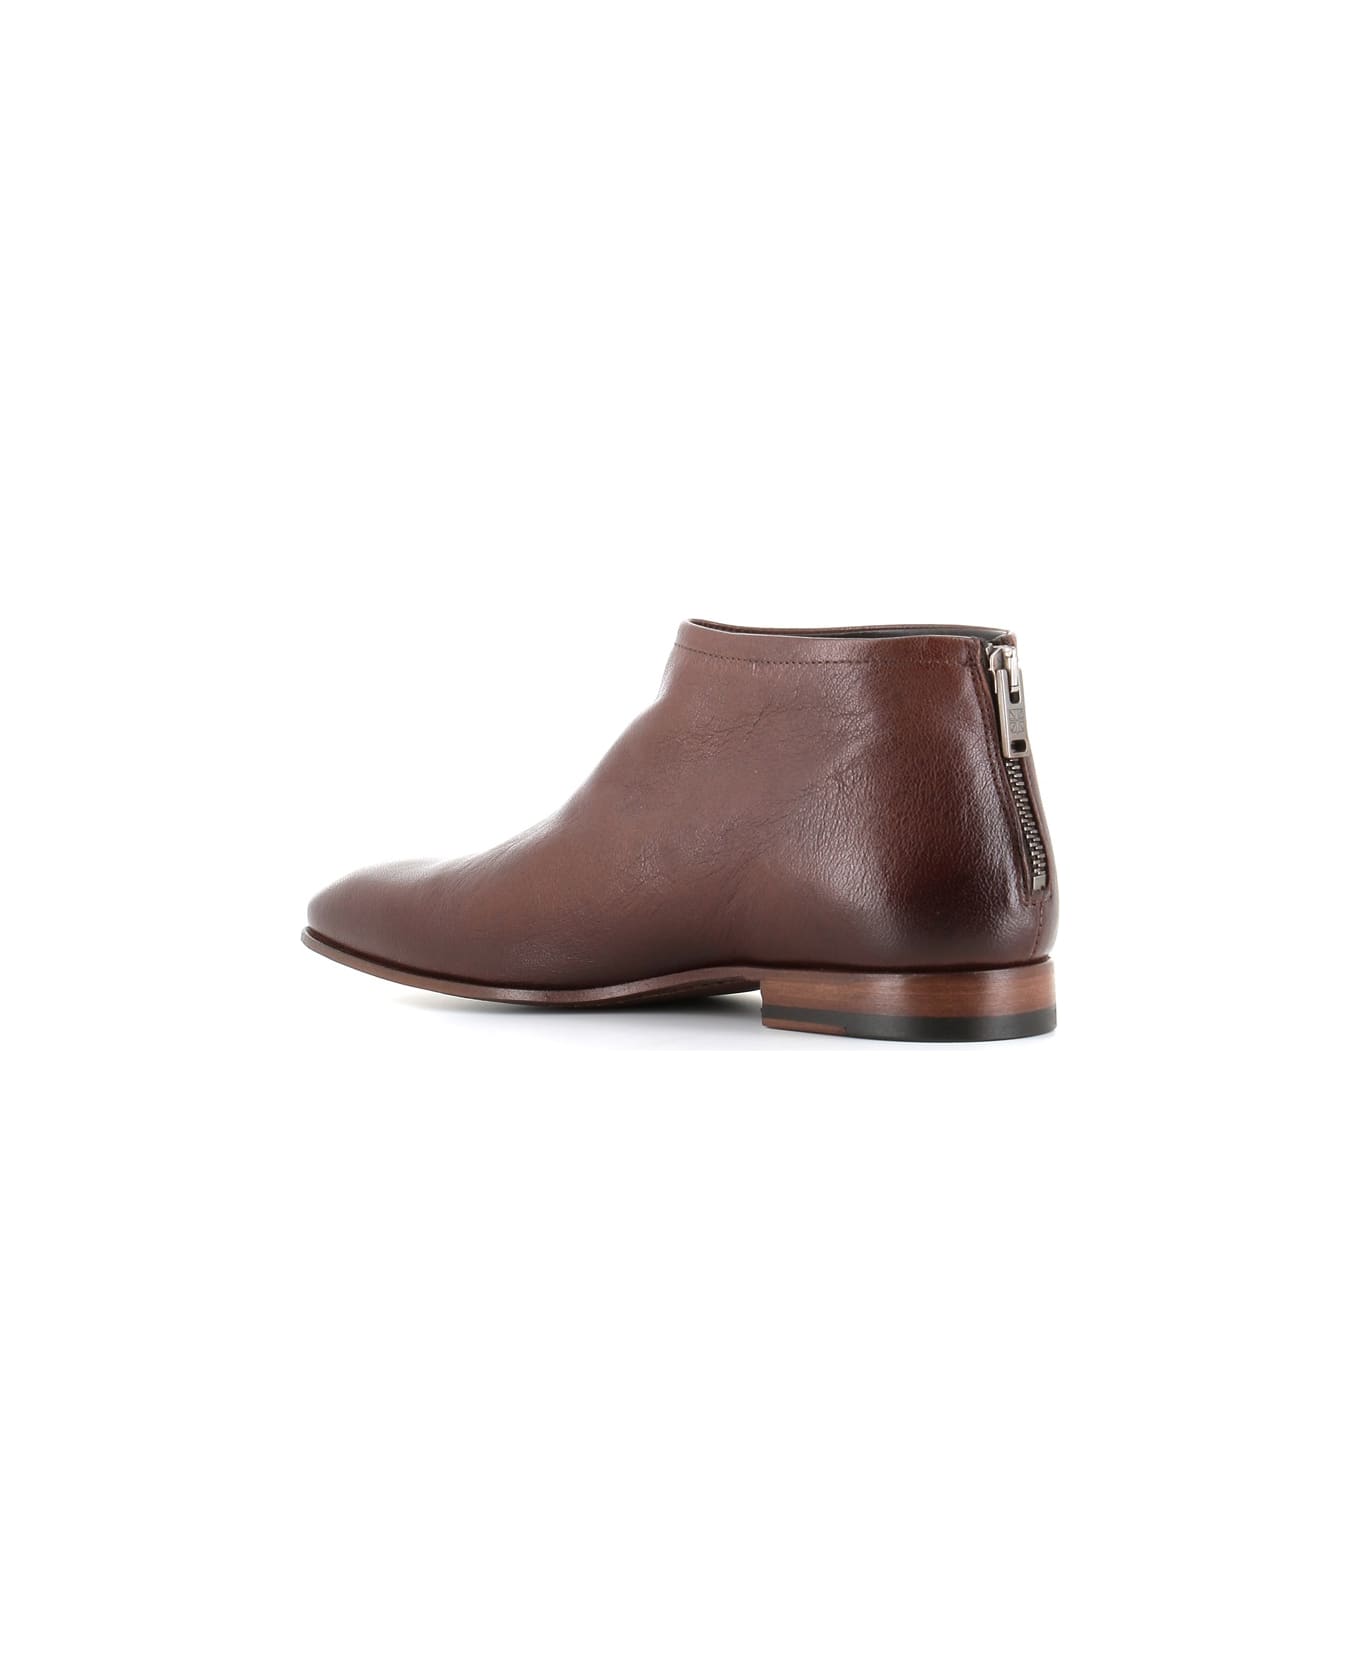 Pantanetti Ankle Boot 17120d - Brown